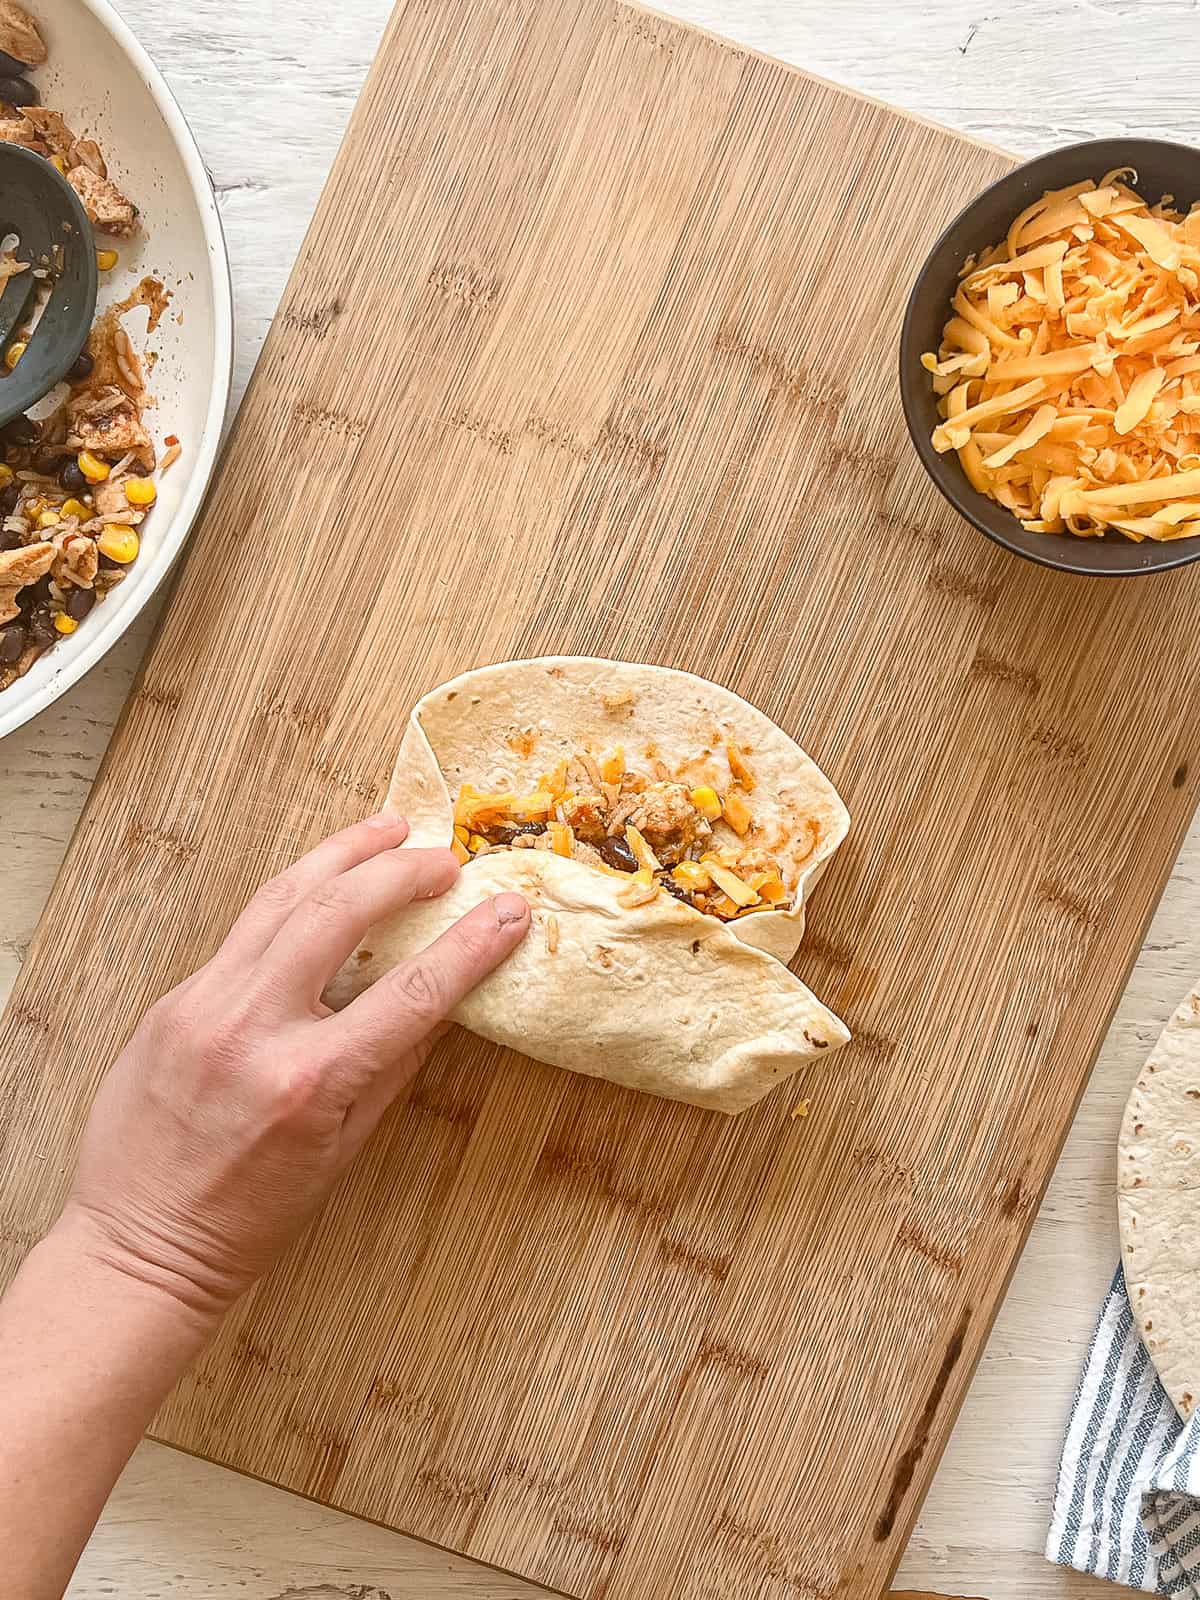 One hand is holding a partially wrapped chicken burrito on a wooden cutting board. Two sides of the tortilla have been folded in and the bottom has been folded up.